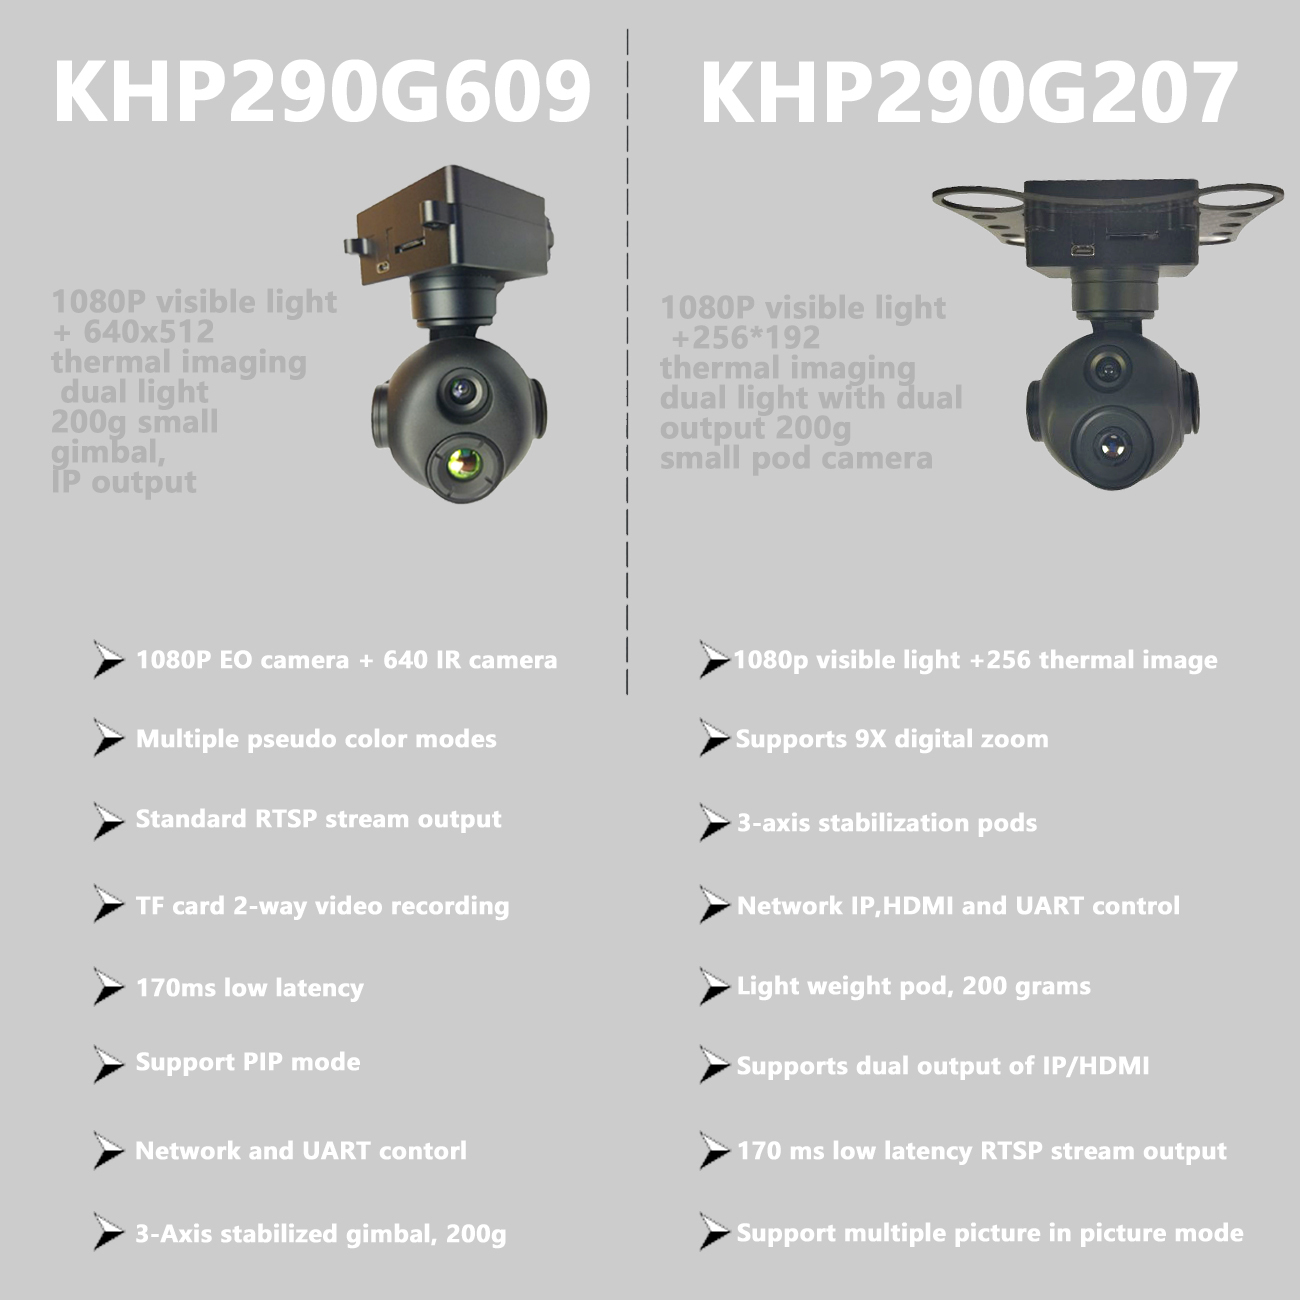 KHP290G207 1080P visible light +256 thermal imaging dual light with dual output 200g small pod camera 